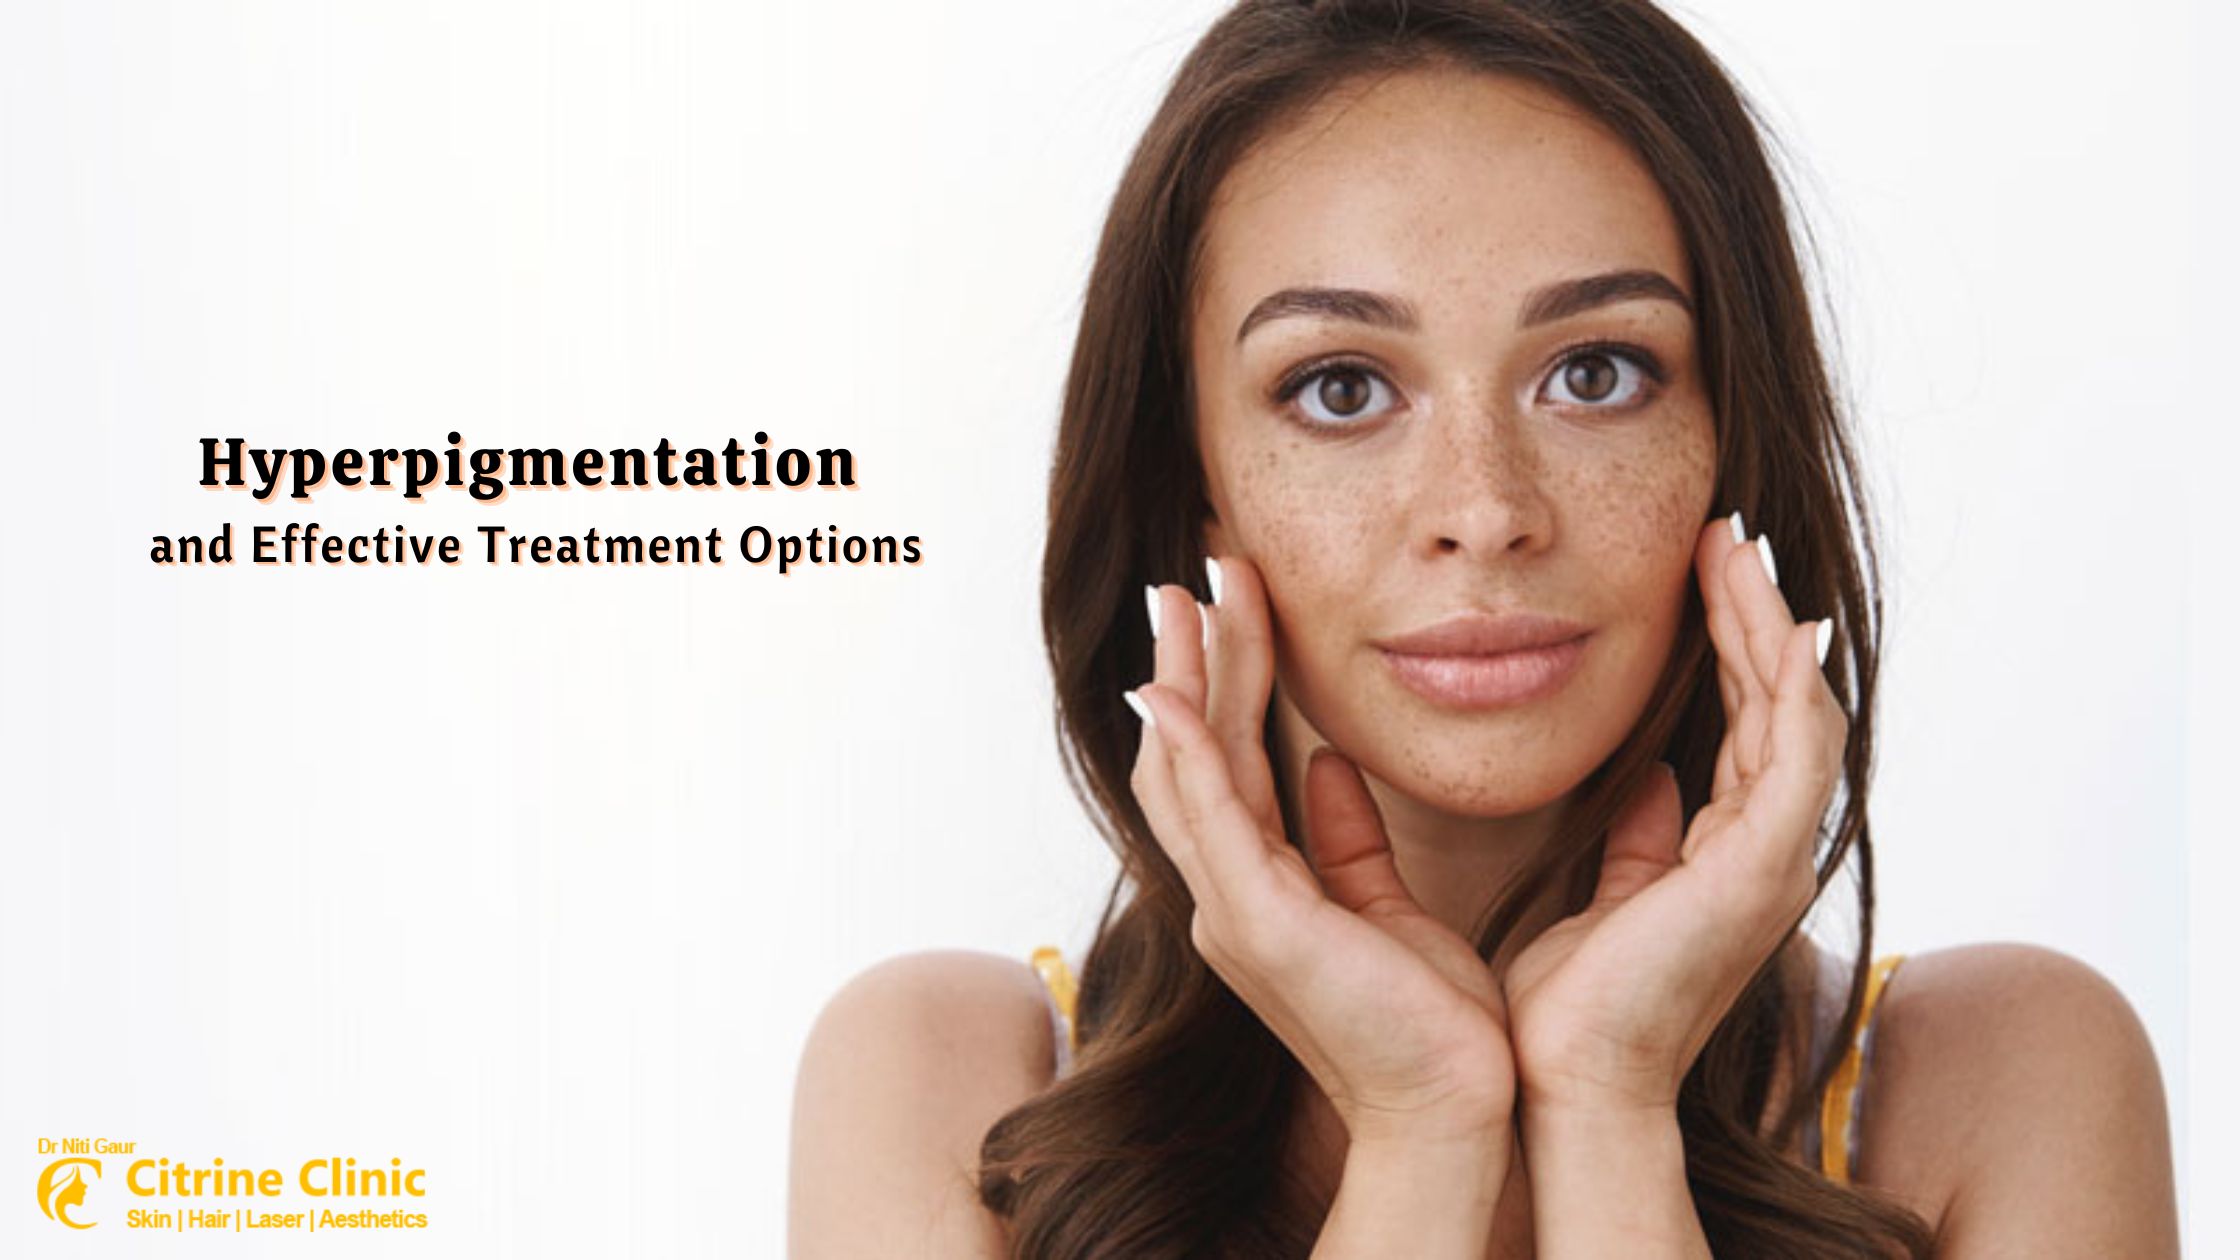 Hyperpigmentation and Effective Treatment Options